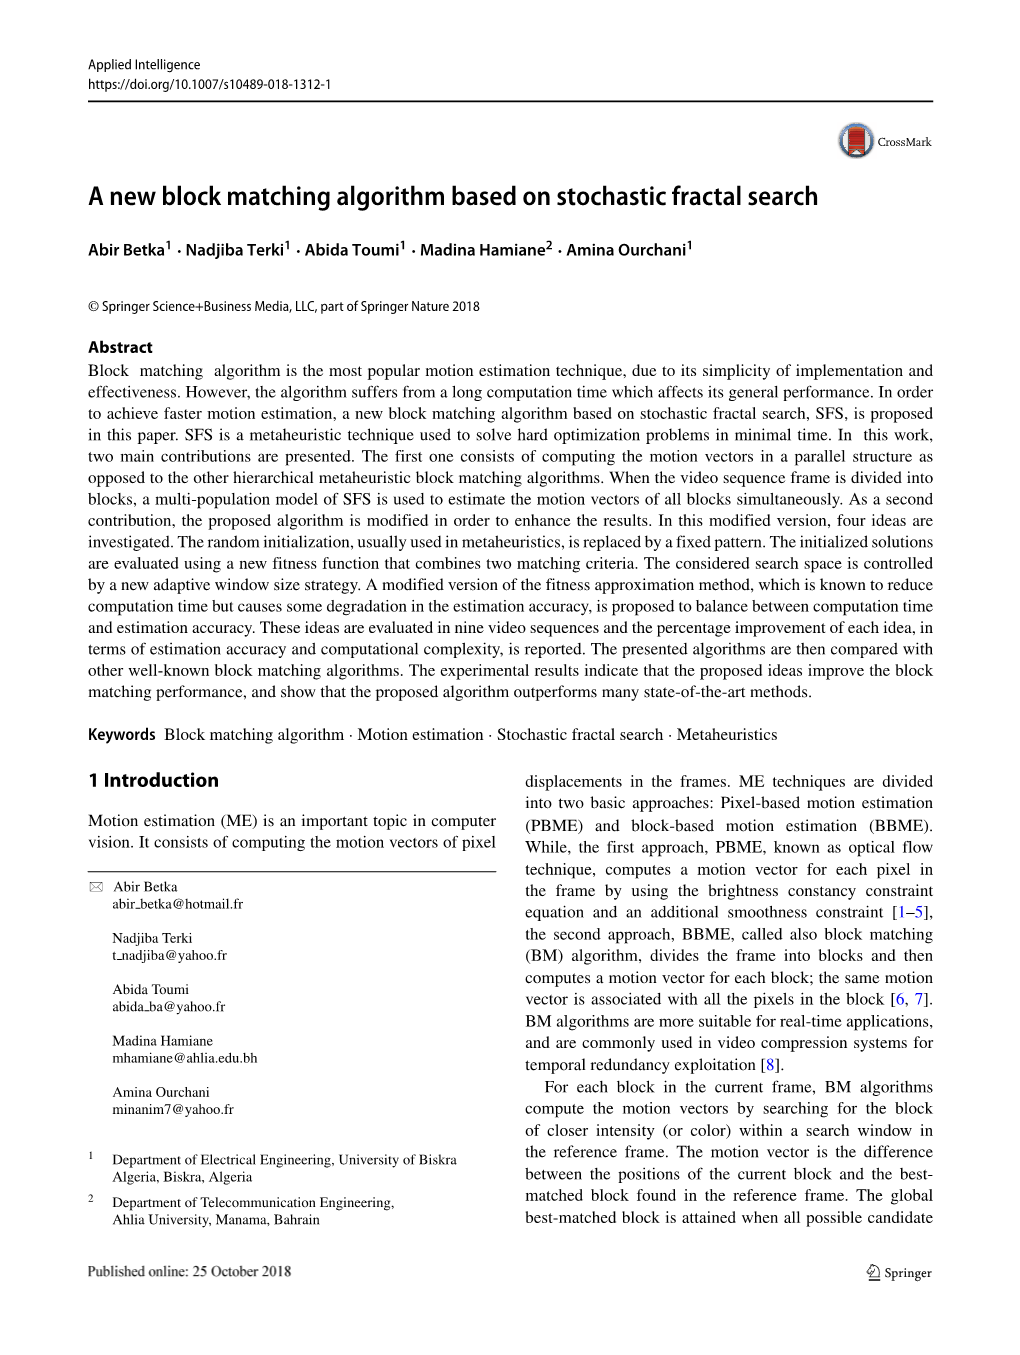 A New Block Matching Algorithm Based on Stochastic Fractal Search